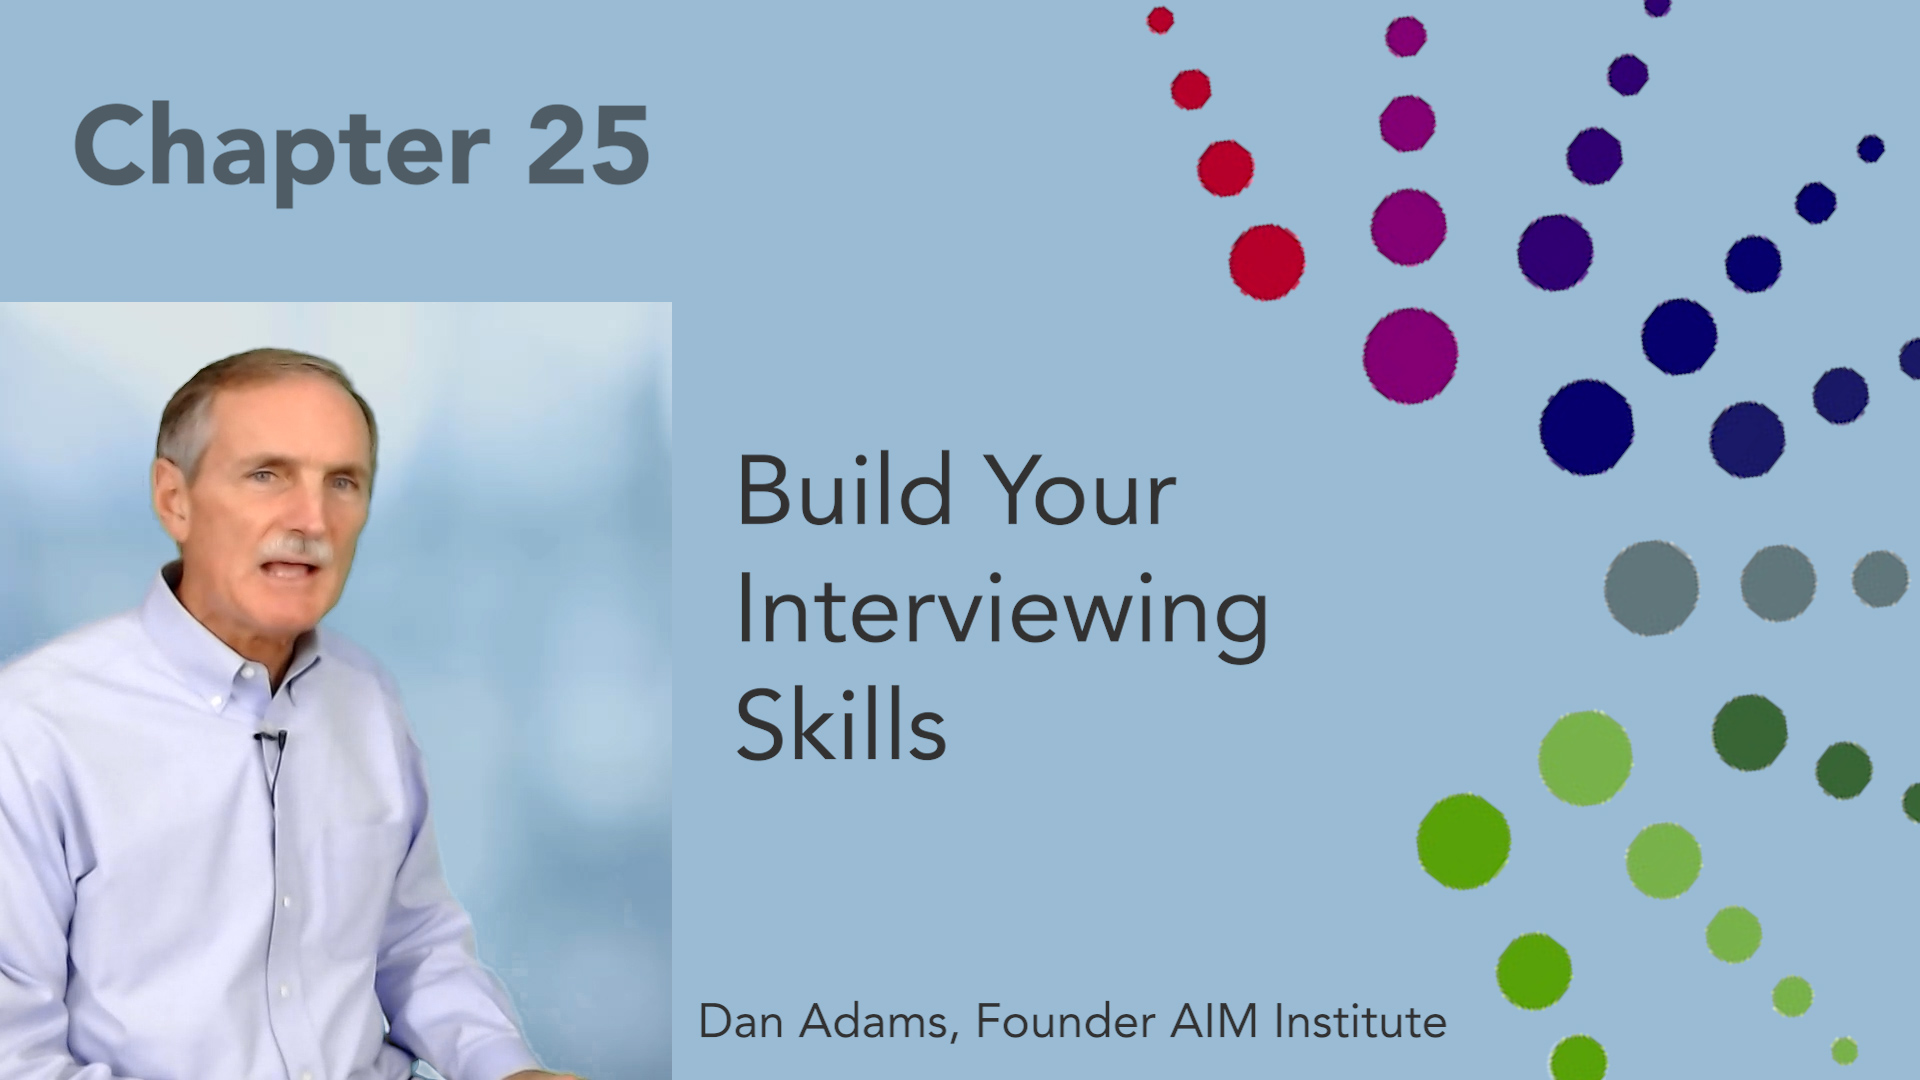 Featured image for “Build Your Interviewing Skills”